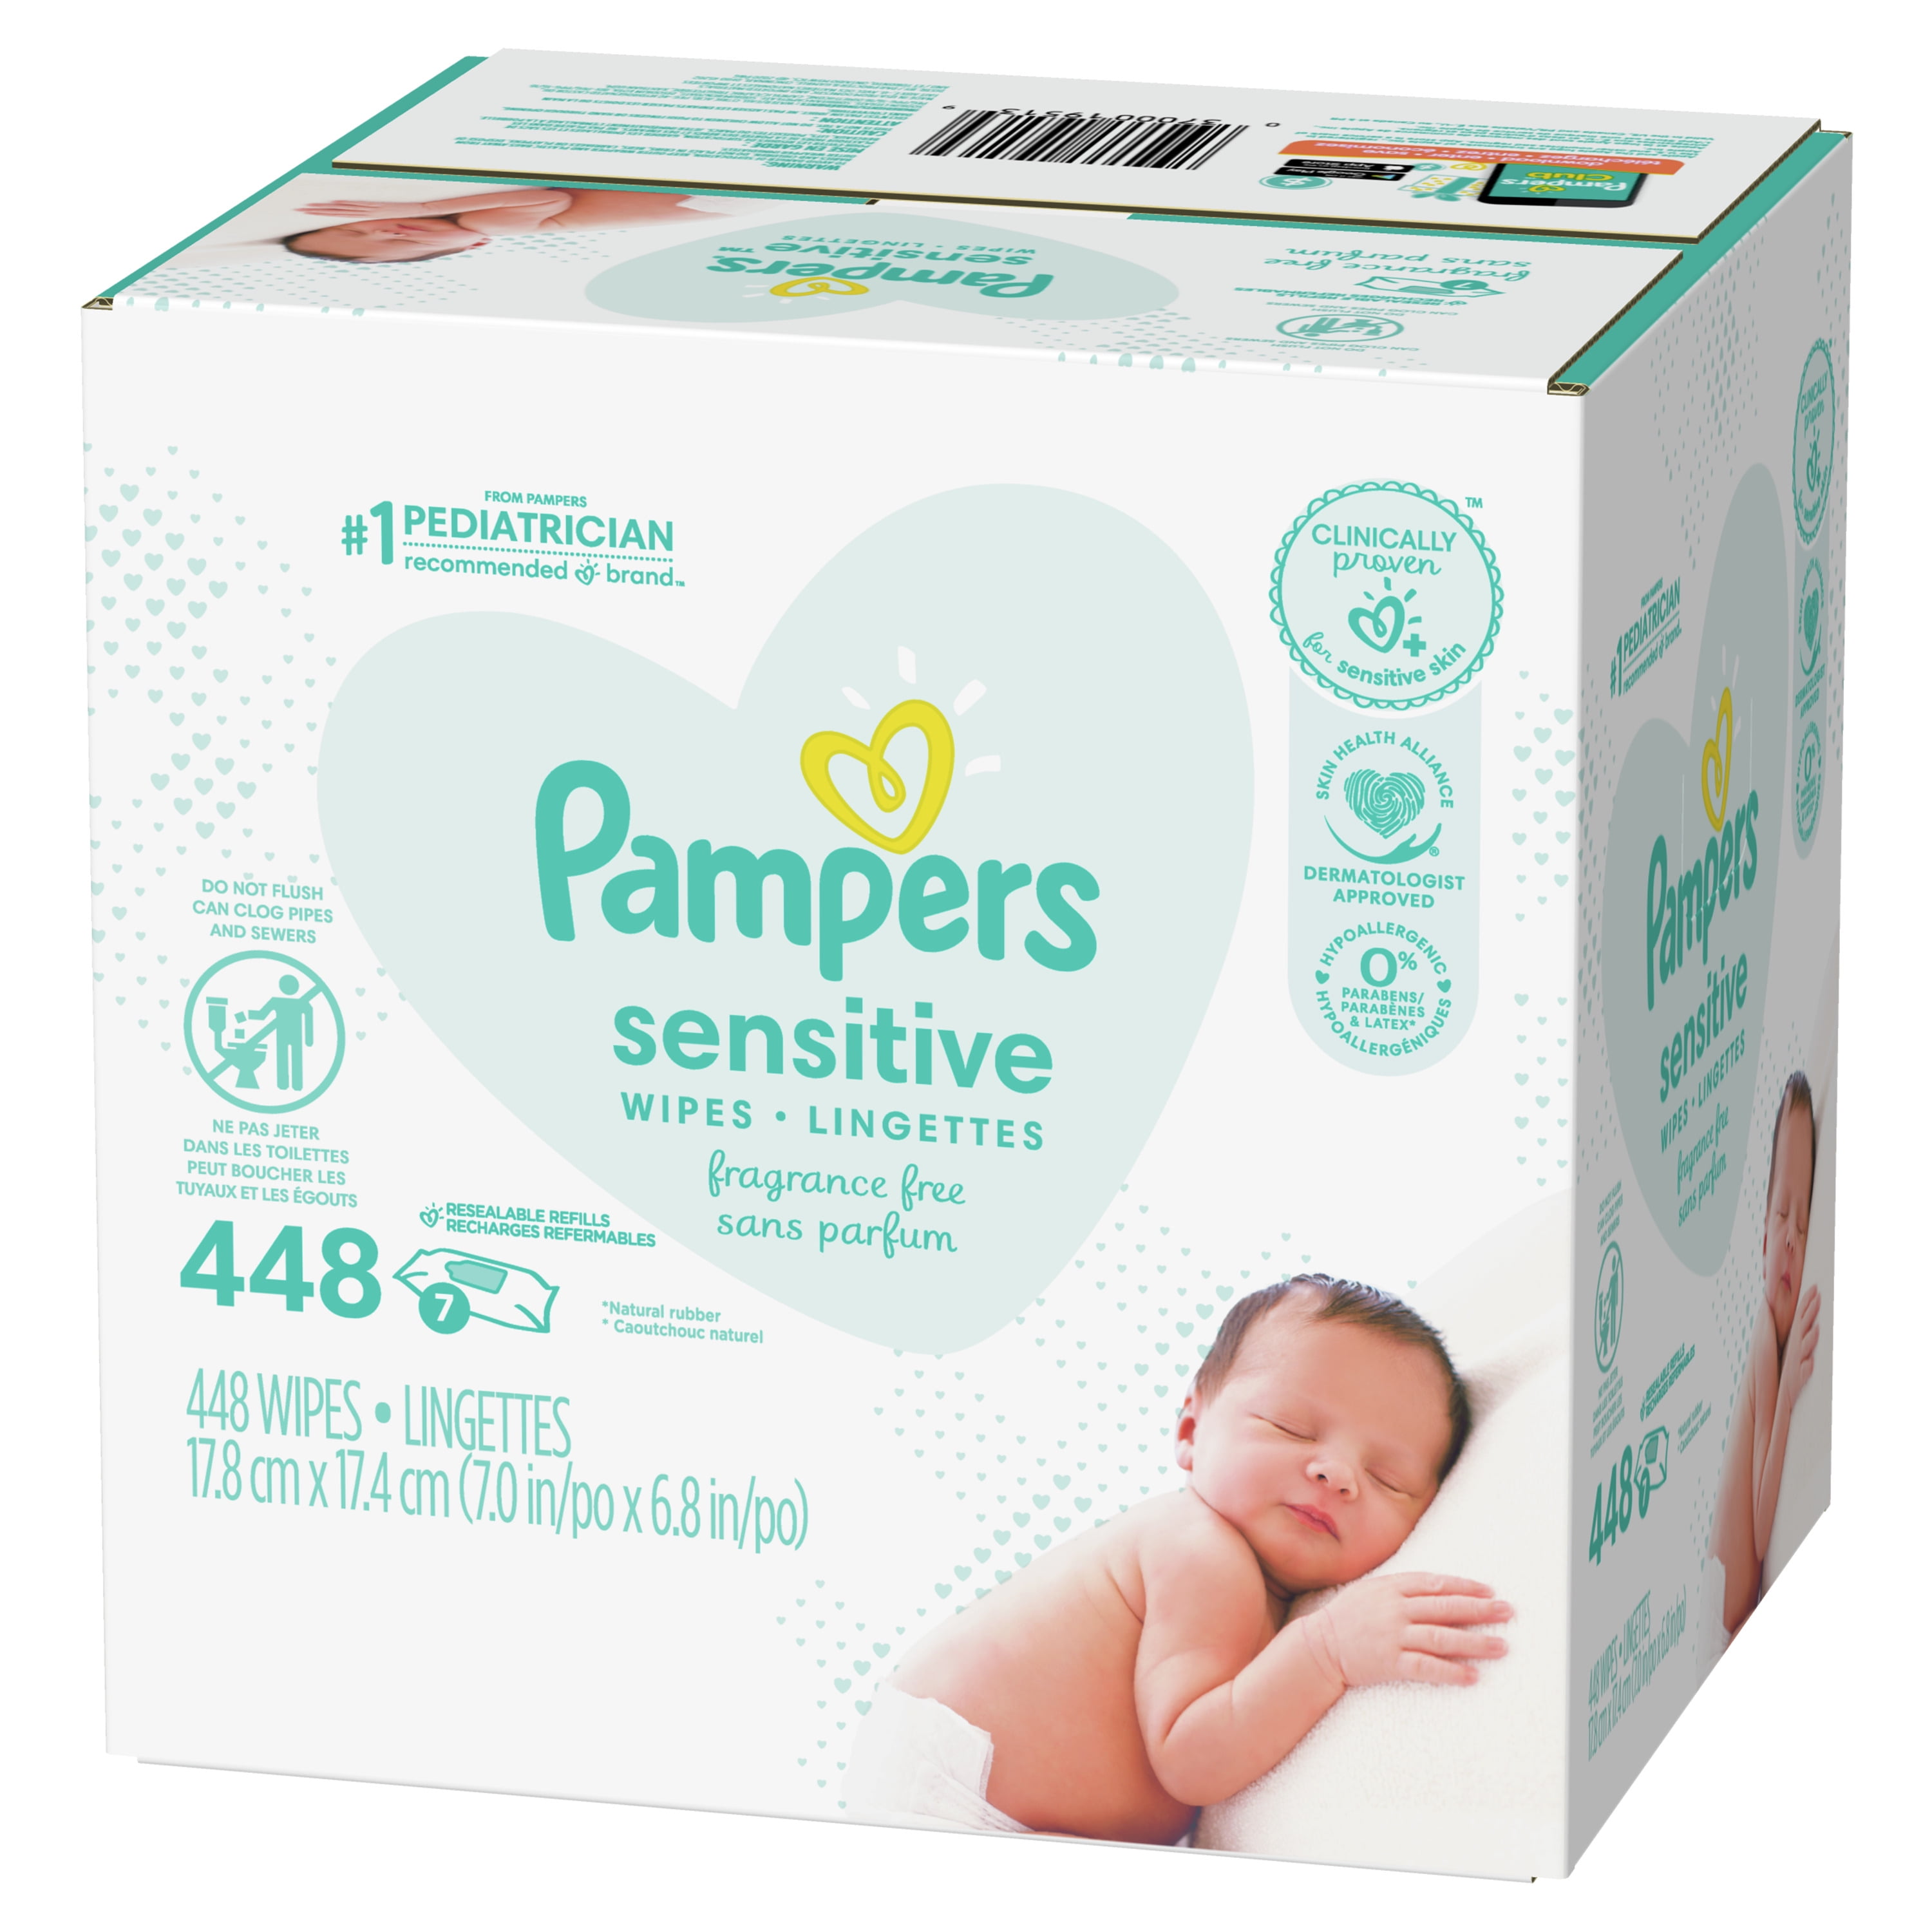 pampers Wipes 7X pk 448 ct 